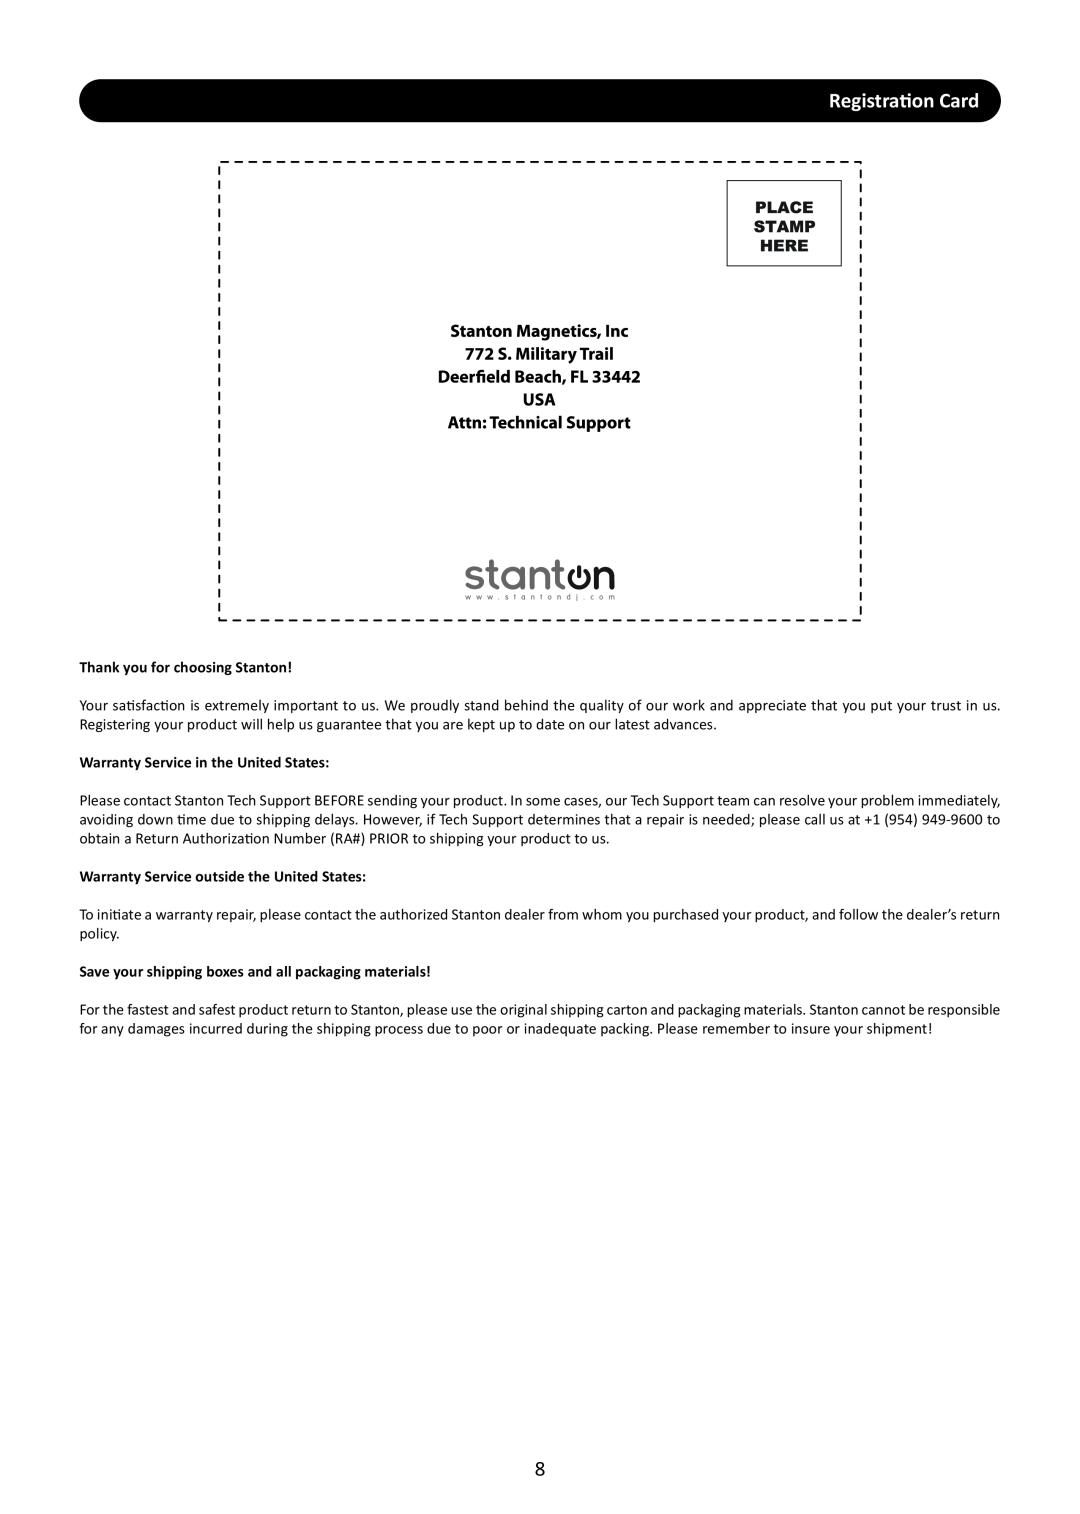 Stanton SMX.311 manual registration Card, Thank you for choosing Stanton, Warranty Service in the United States 